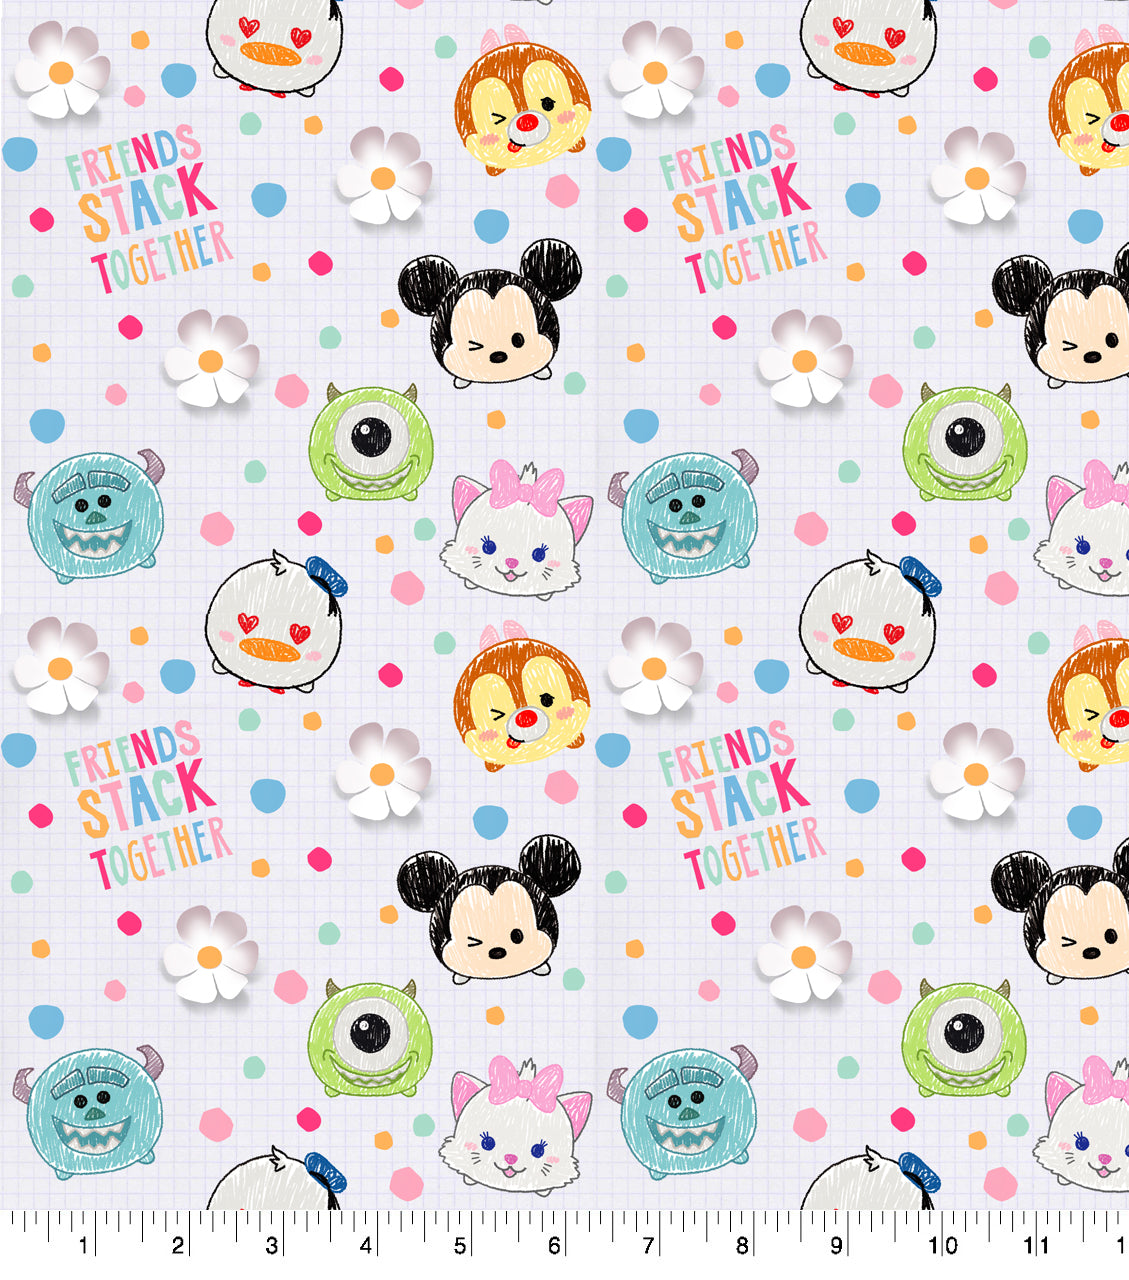 Disney Tsum Tsum Friends Stack Together Fabric –